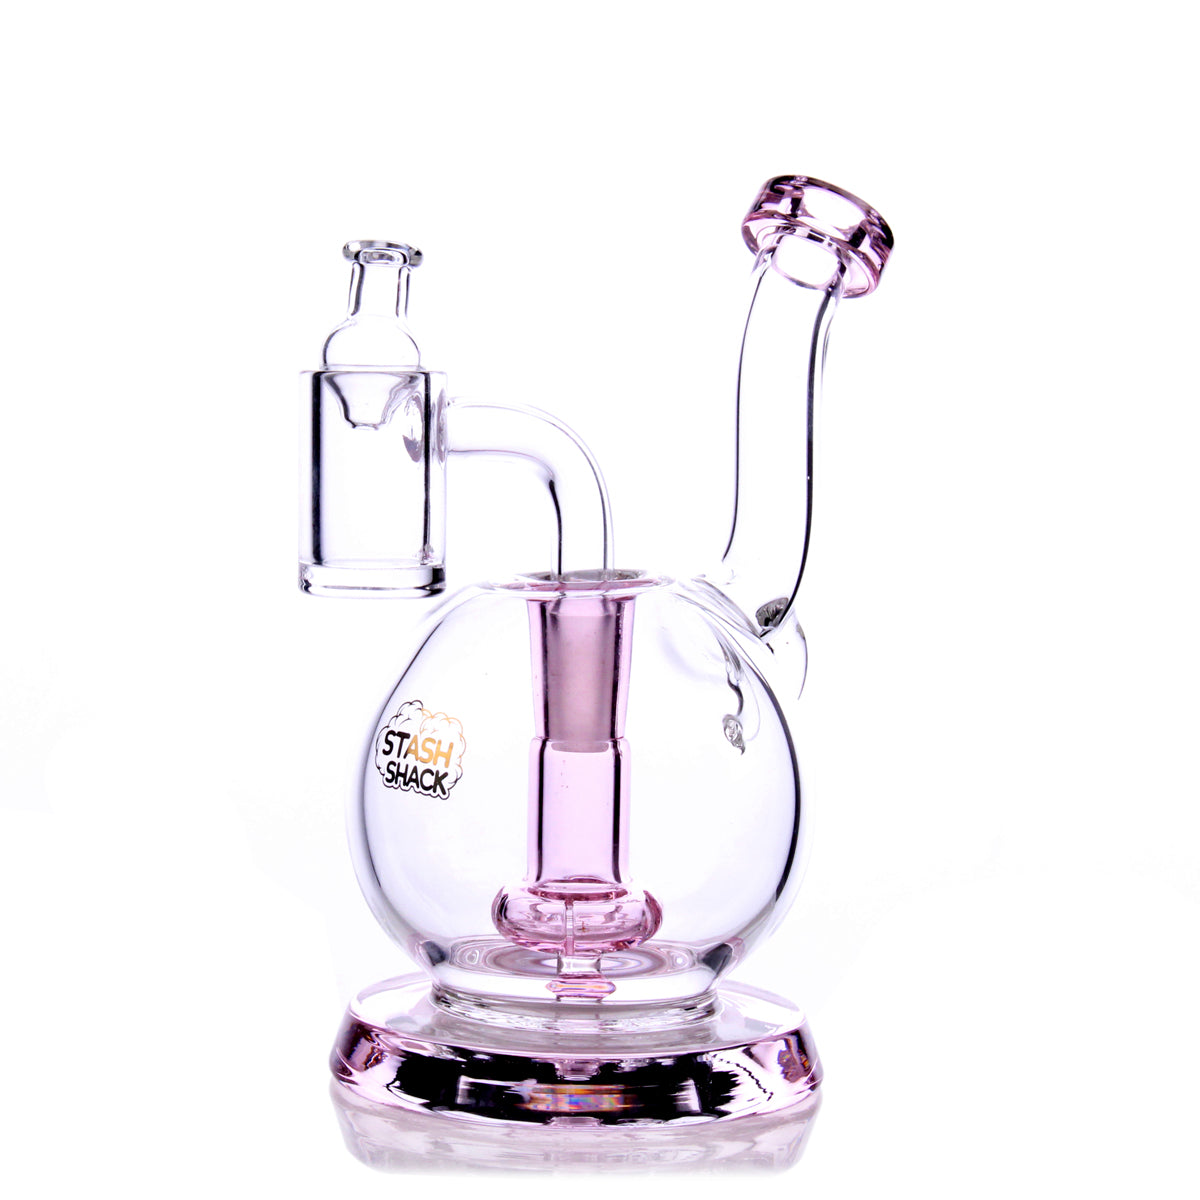 TerpGlobe Mini Rig by The Stash Shack, 5" pink borosilicate glass with showerhead percolator, front view